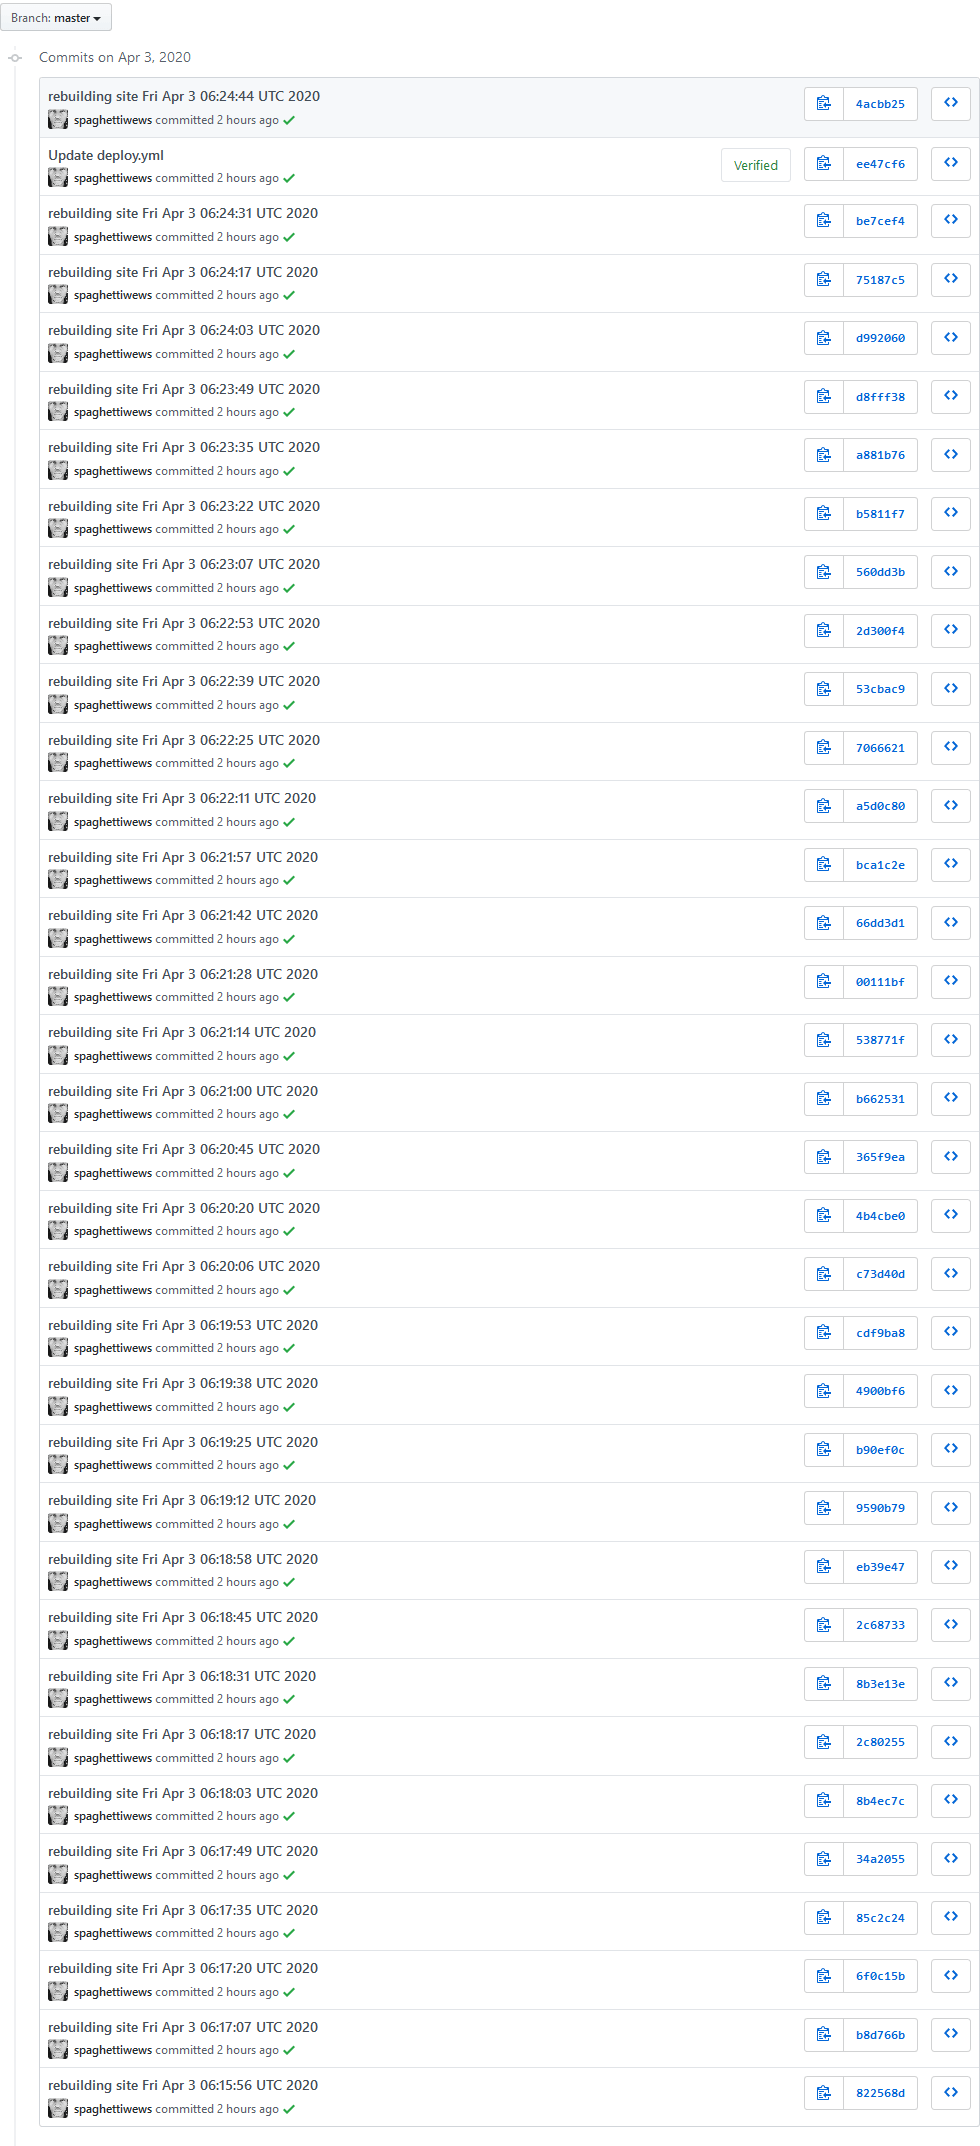 so much for a clean commit history